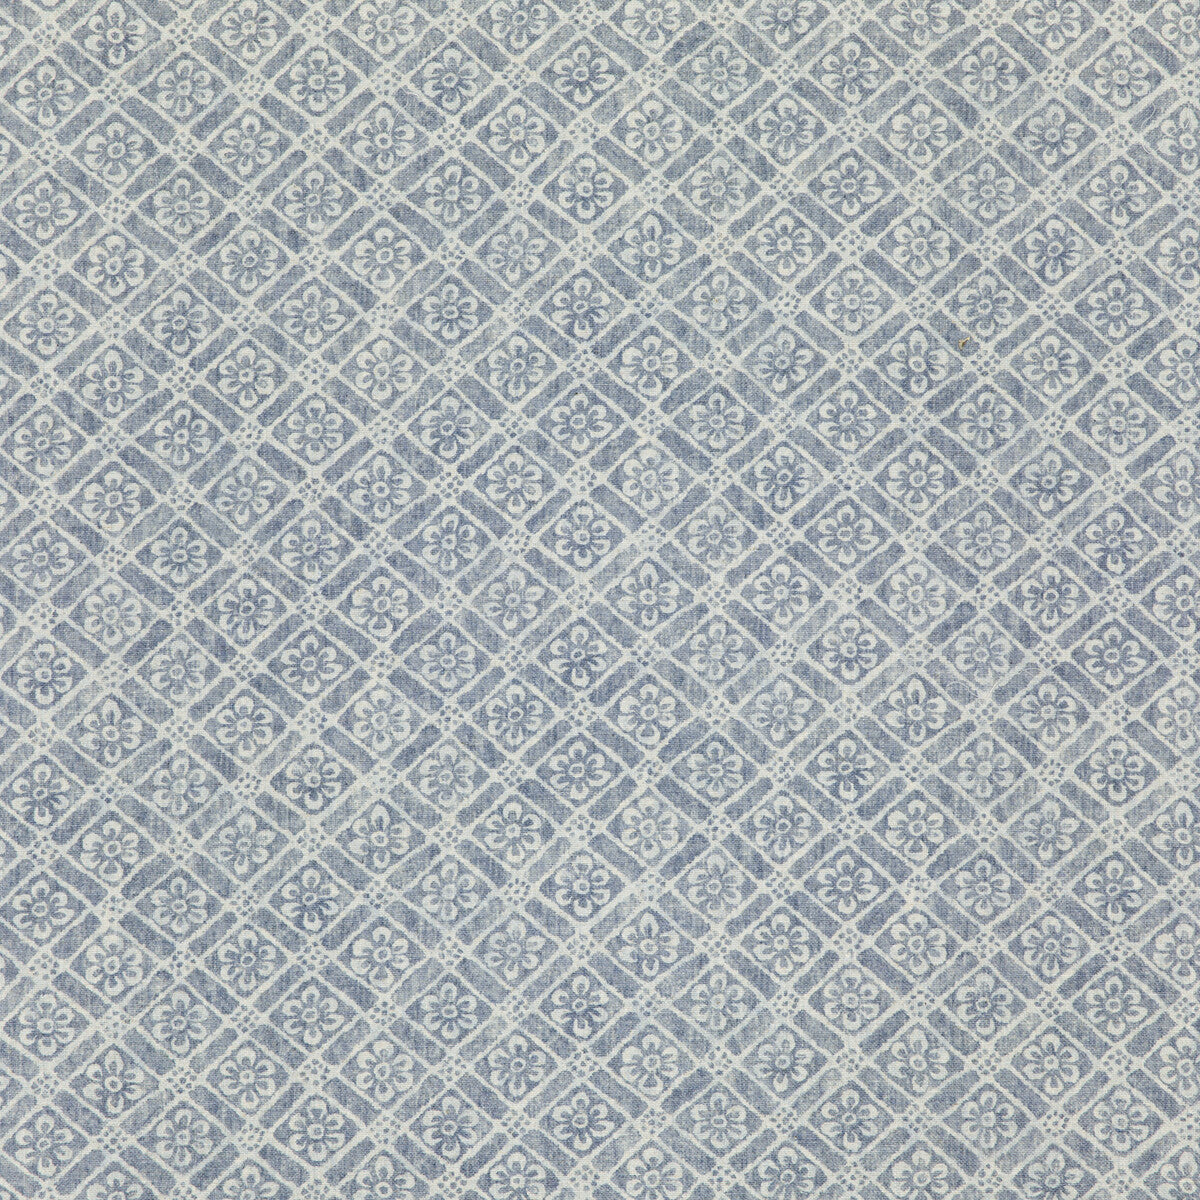 Moreton Trellis fabric in indigo color - pattern BP10775.2.0 - by G P &amp; J Baker in the Signature Prints collection